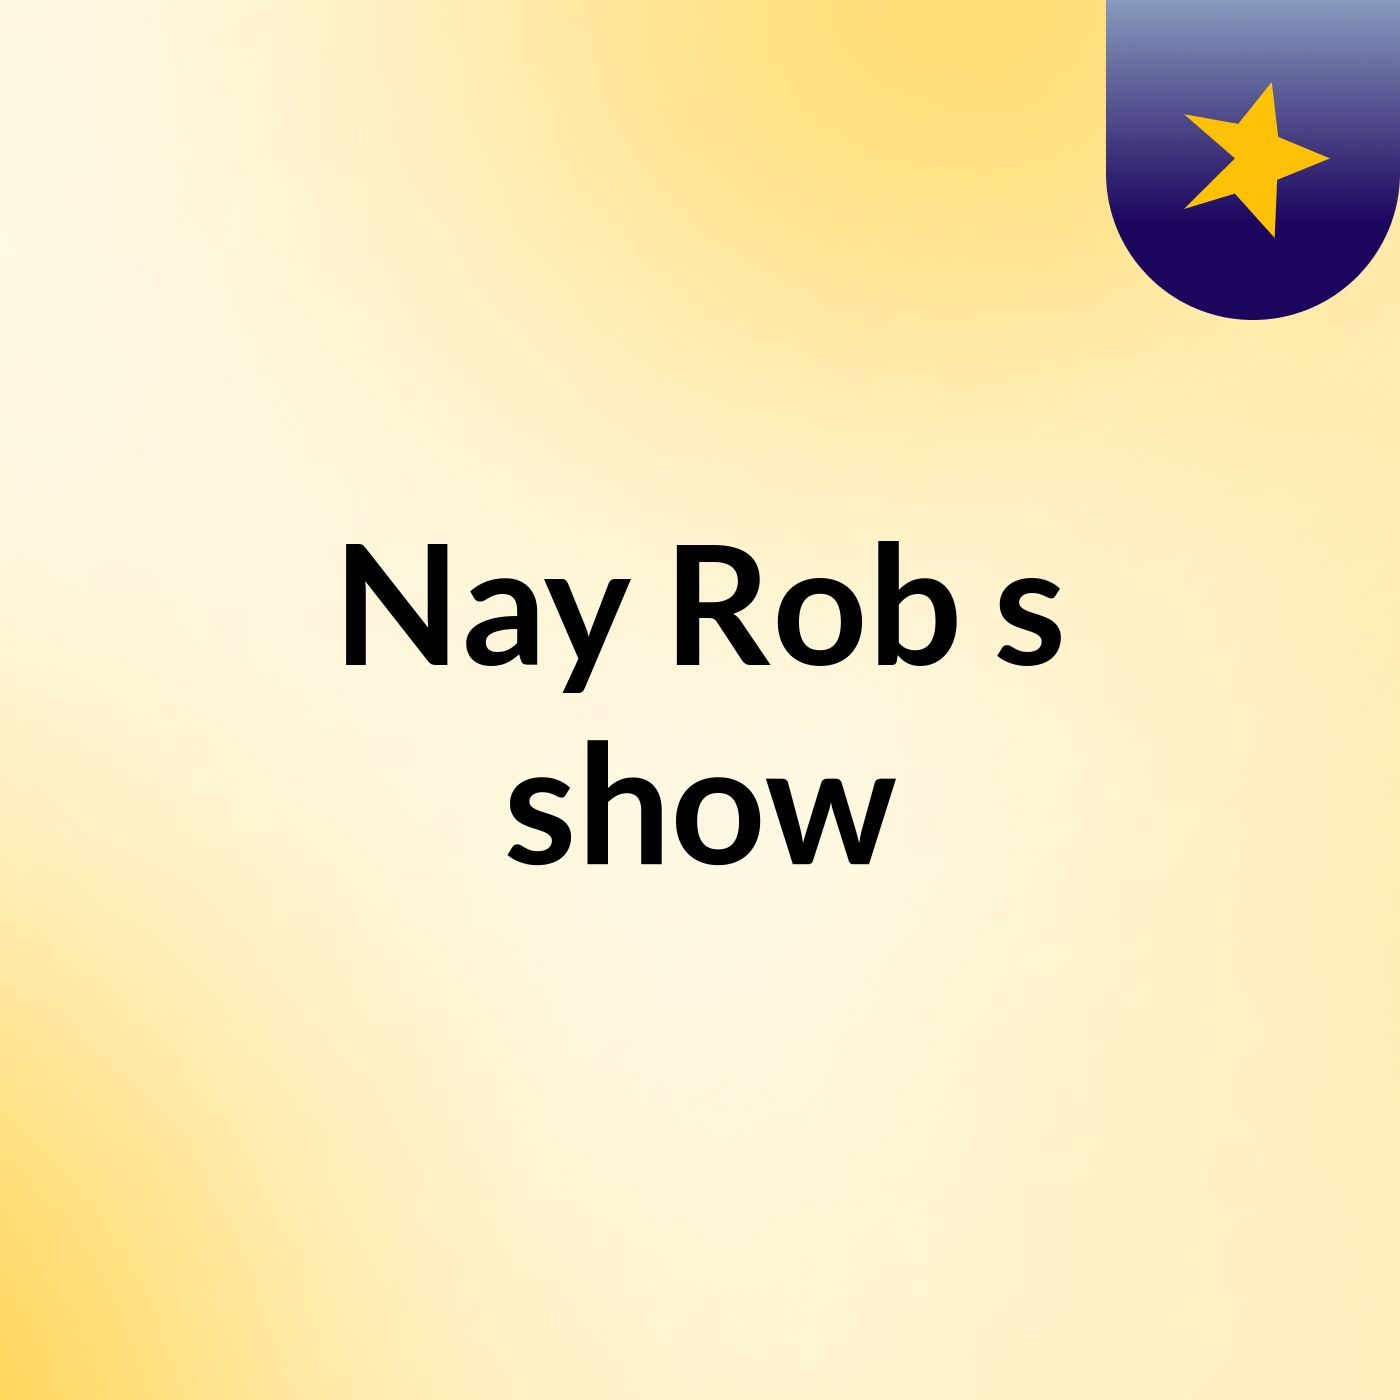 Nay Rob's show